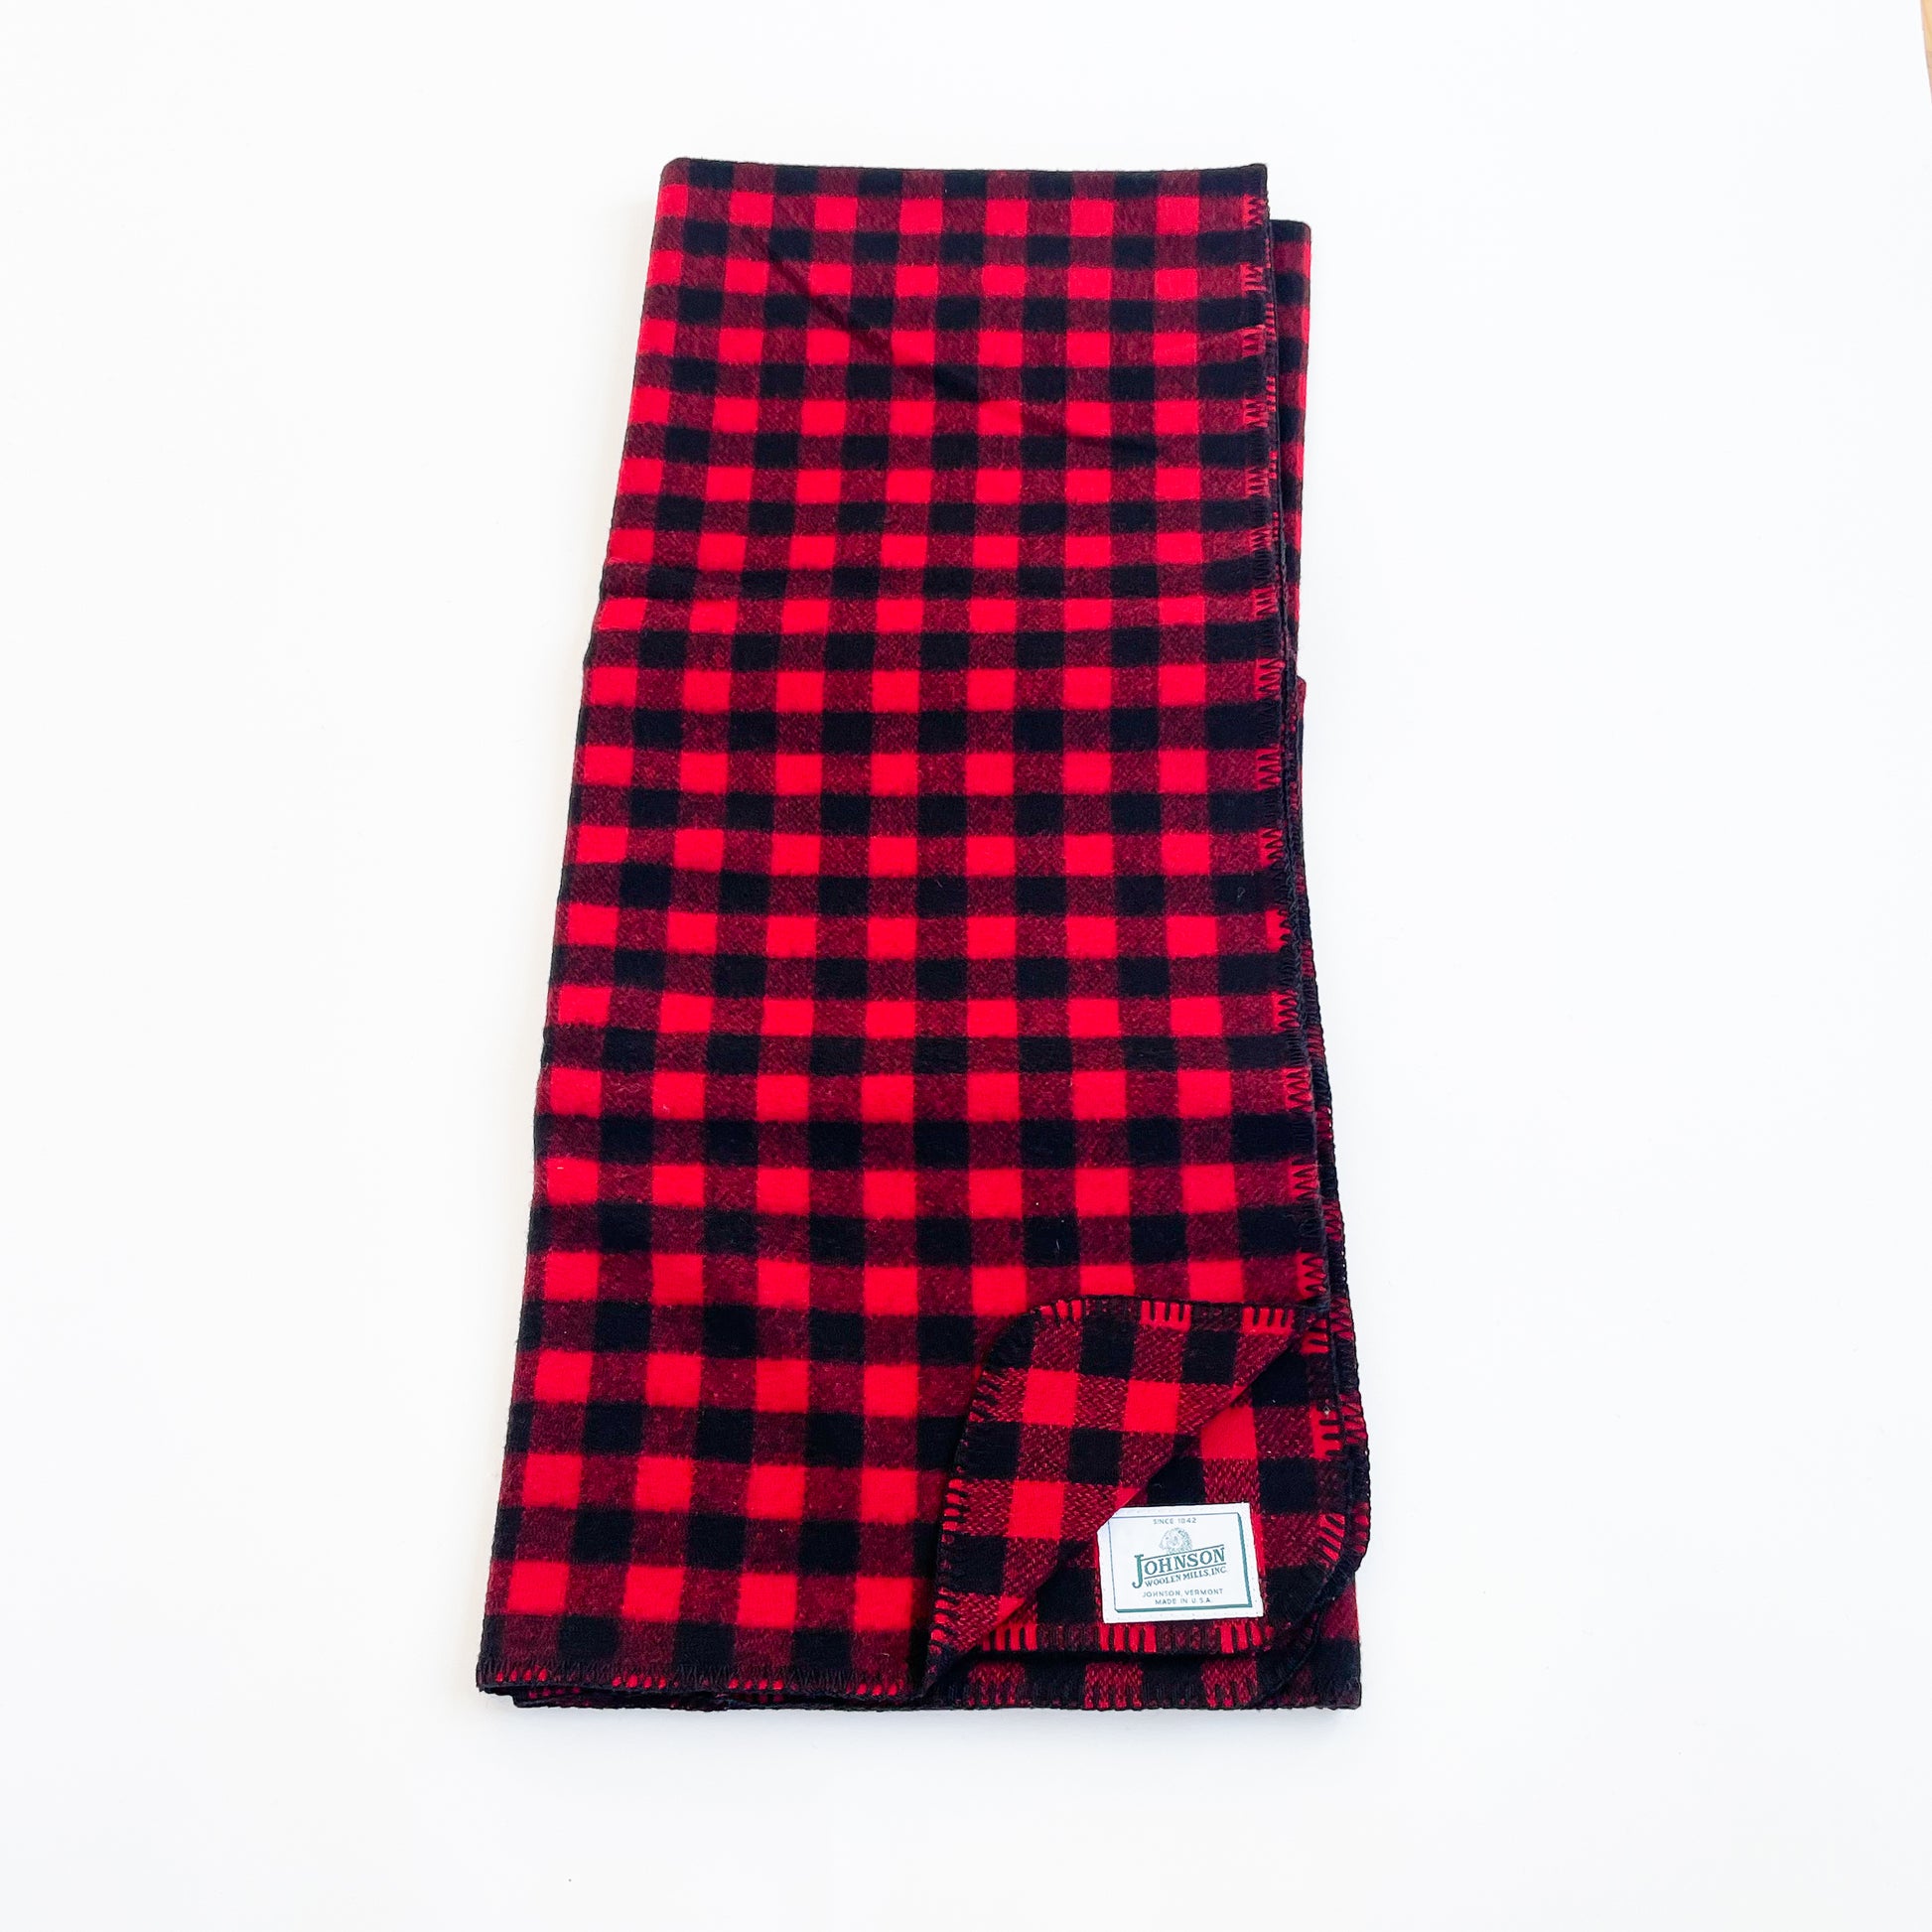 Johnson Woolen Mills throws Redcheck, Red & Black buffalo 1 inch squares unfolded front view